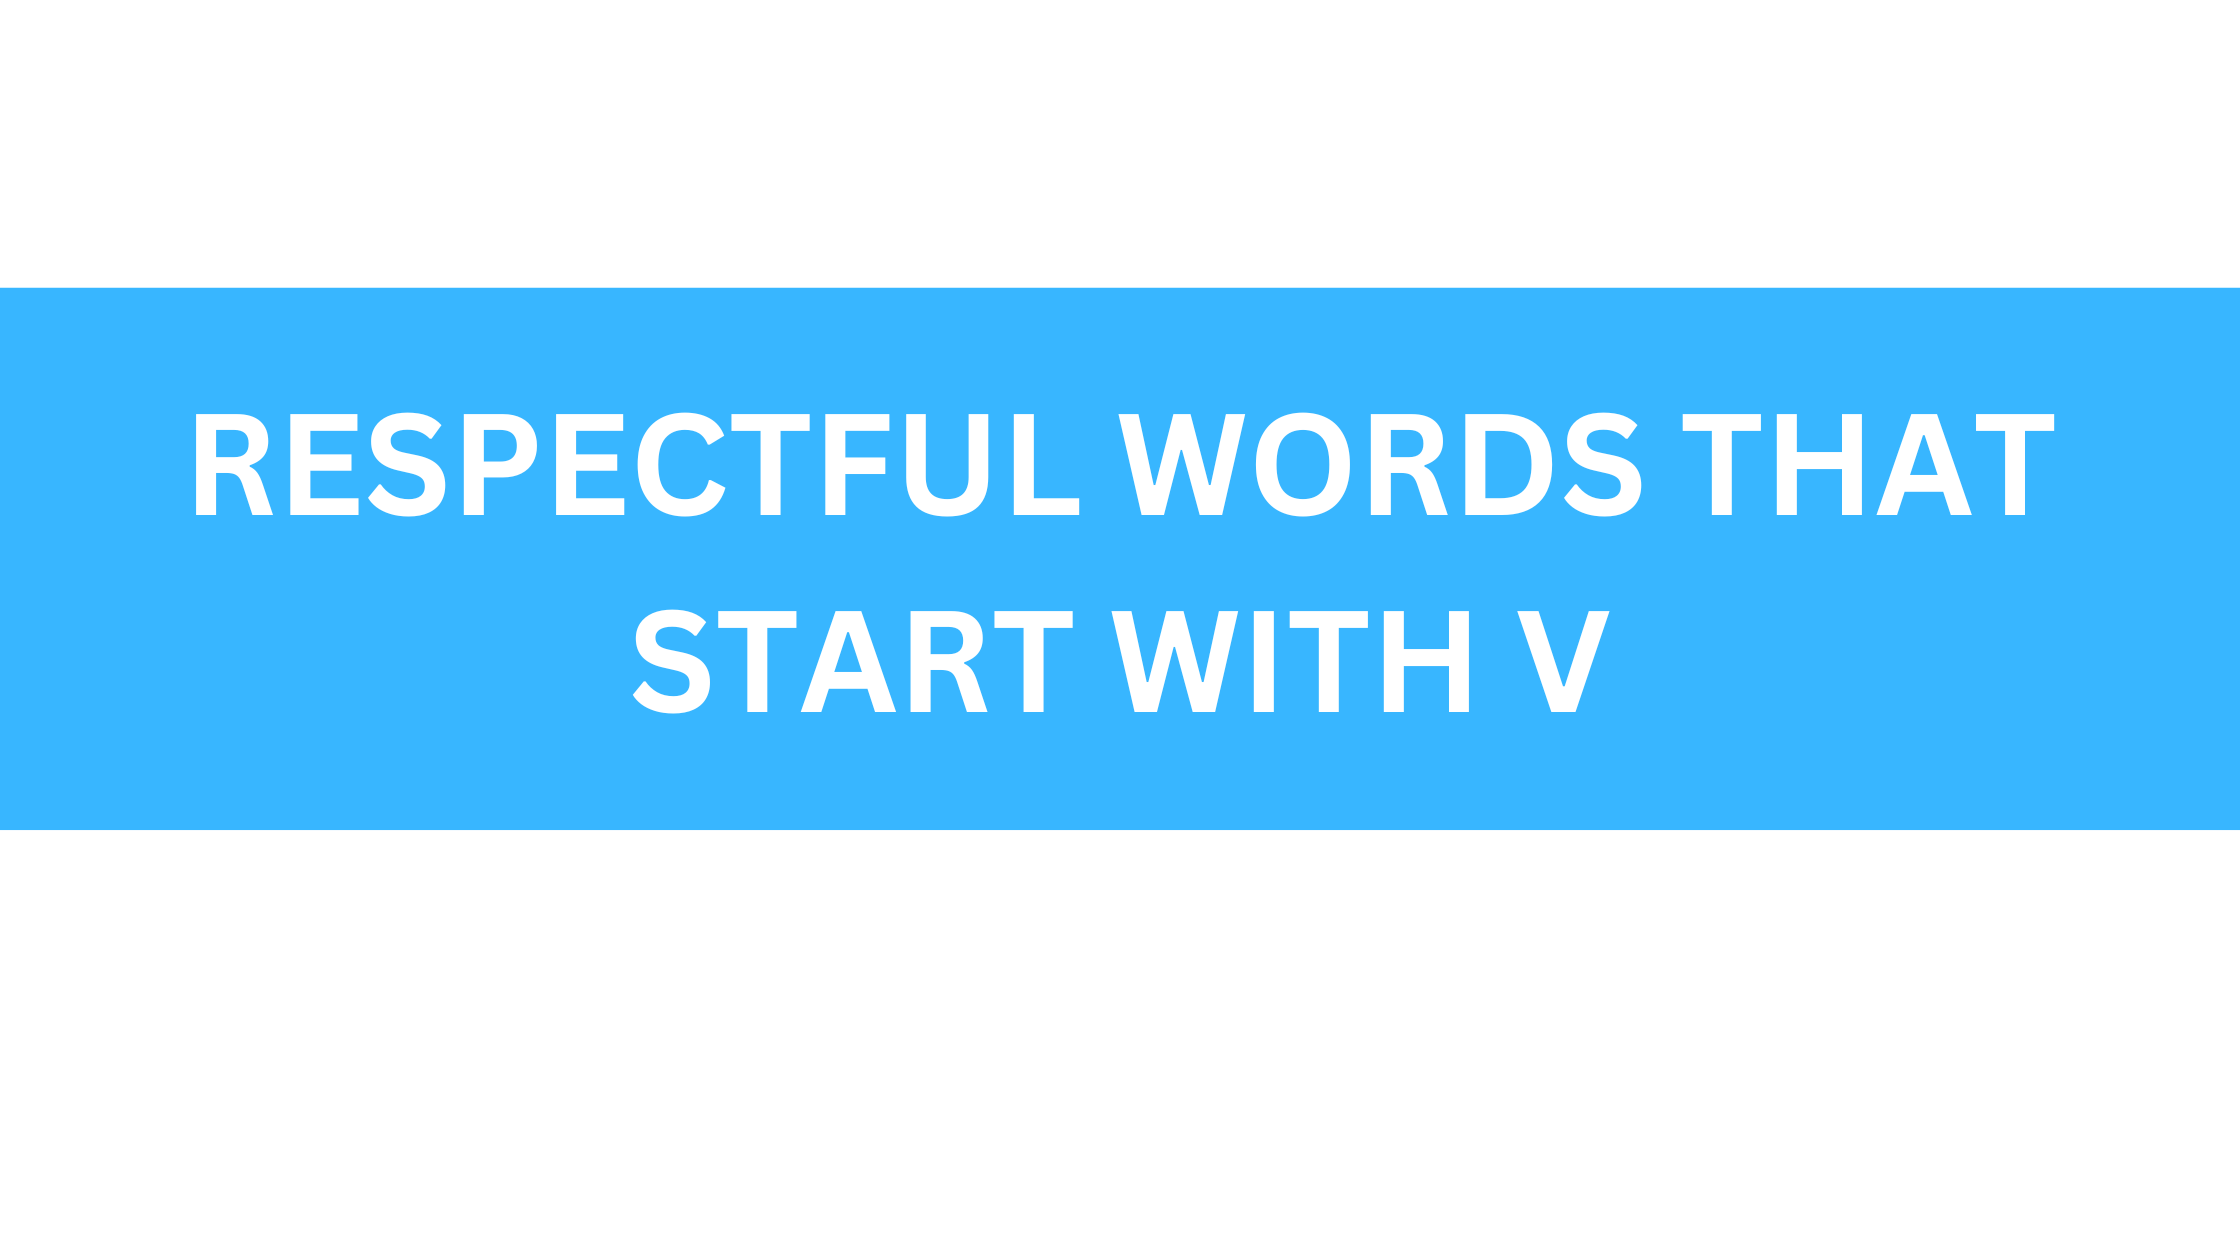 respectful words that start with v